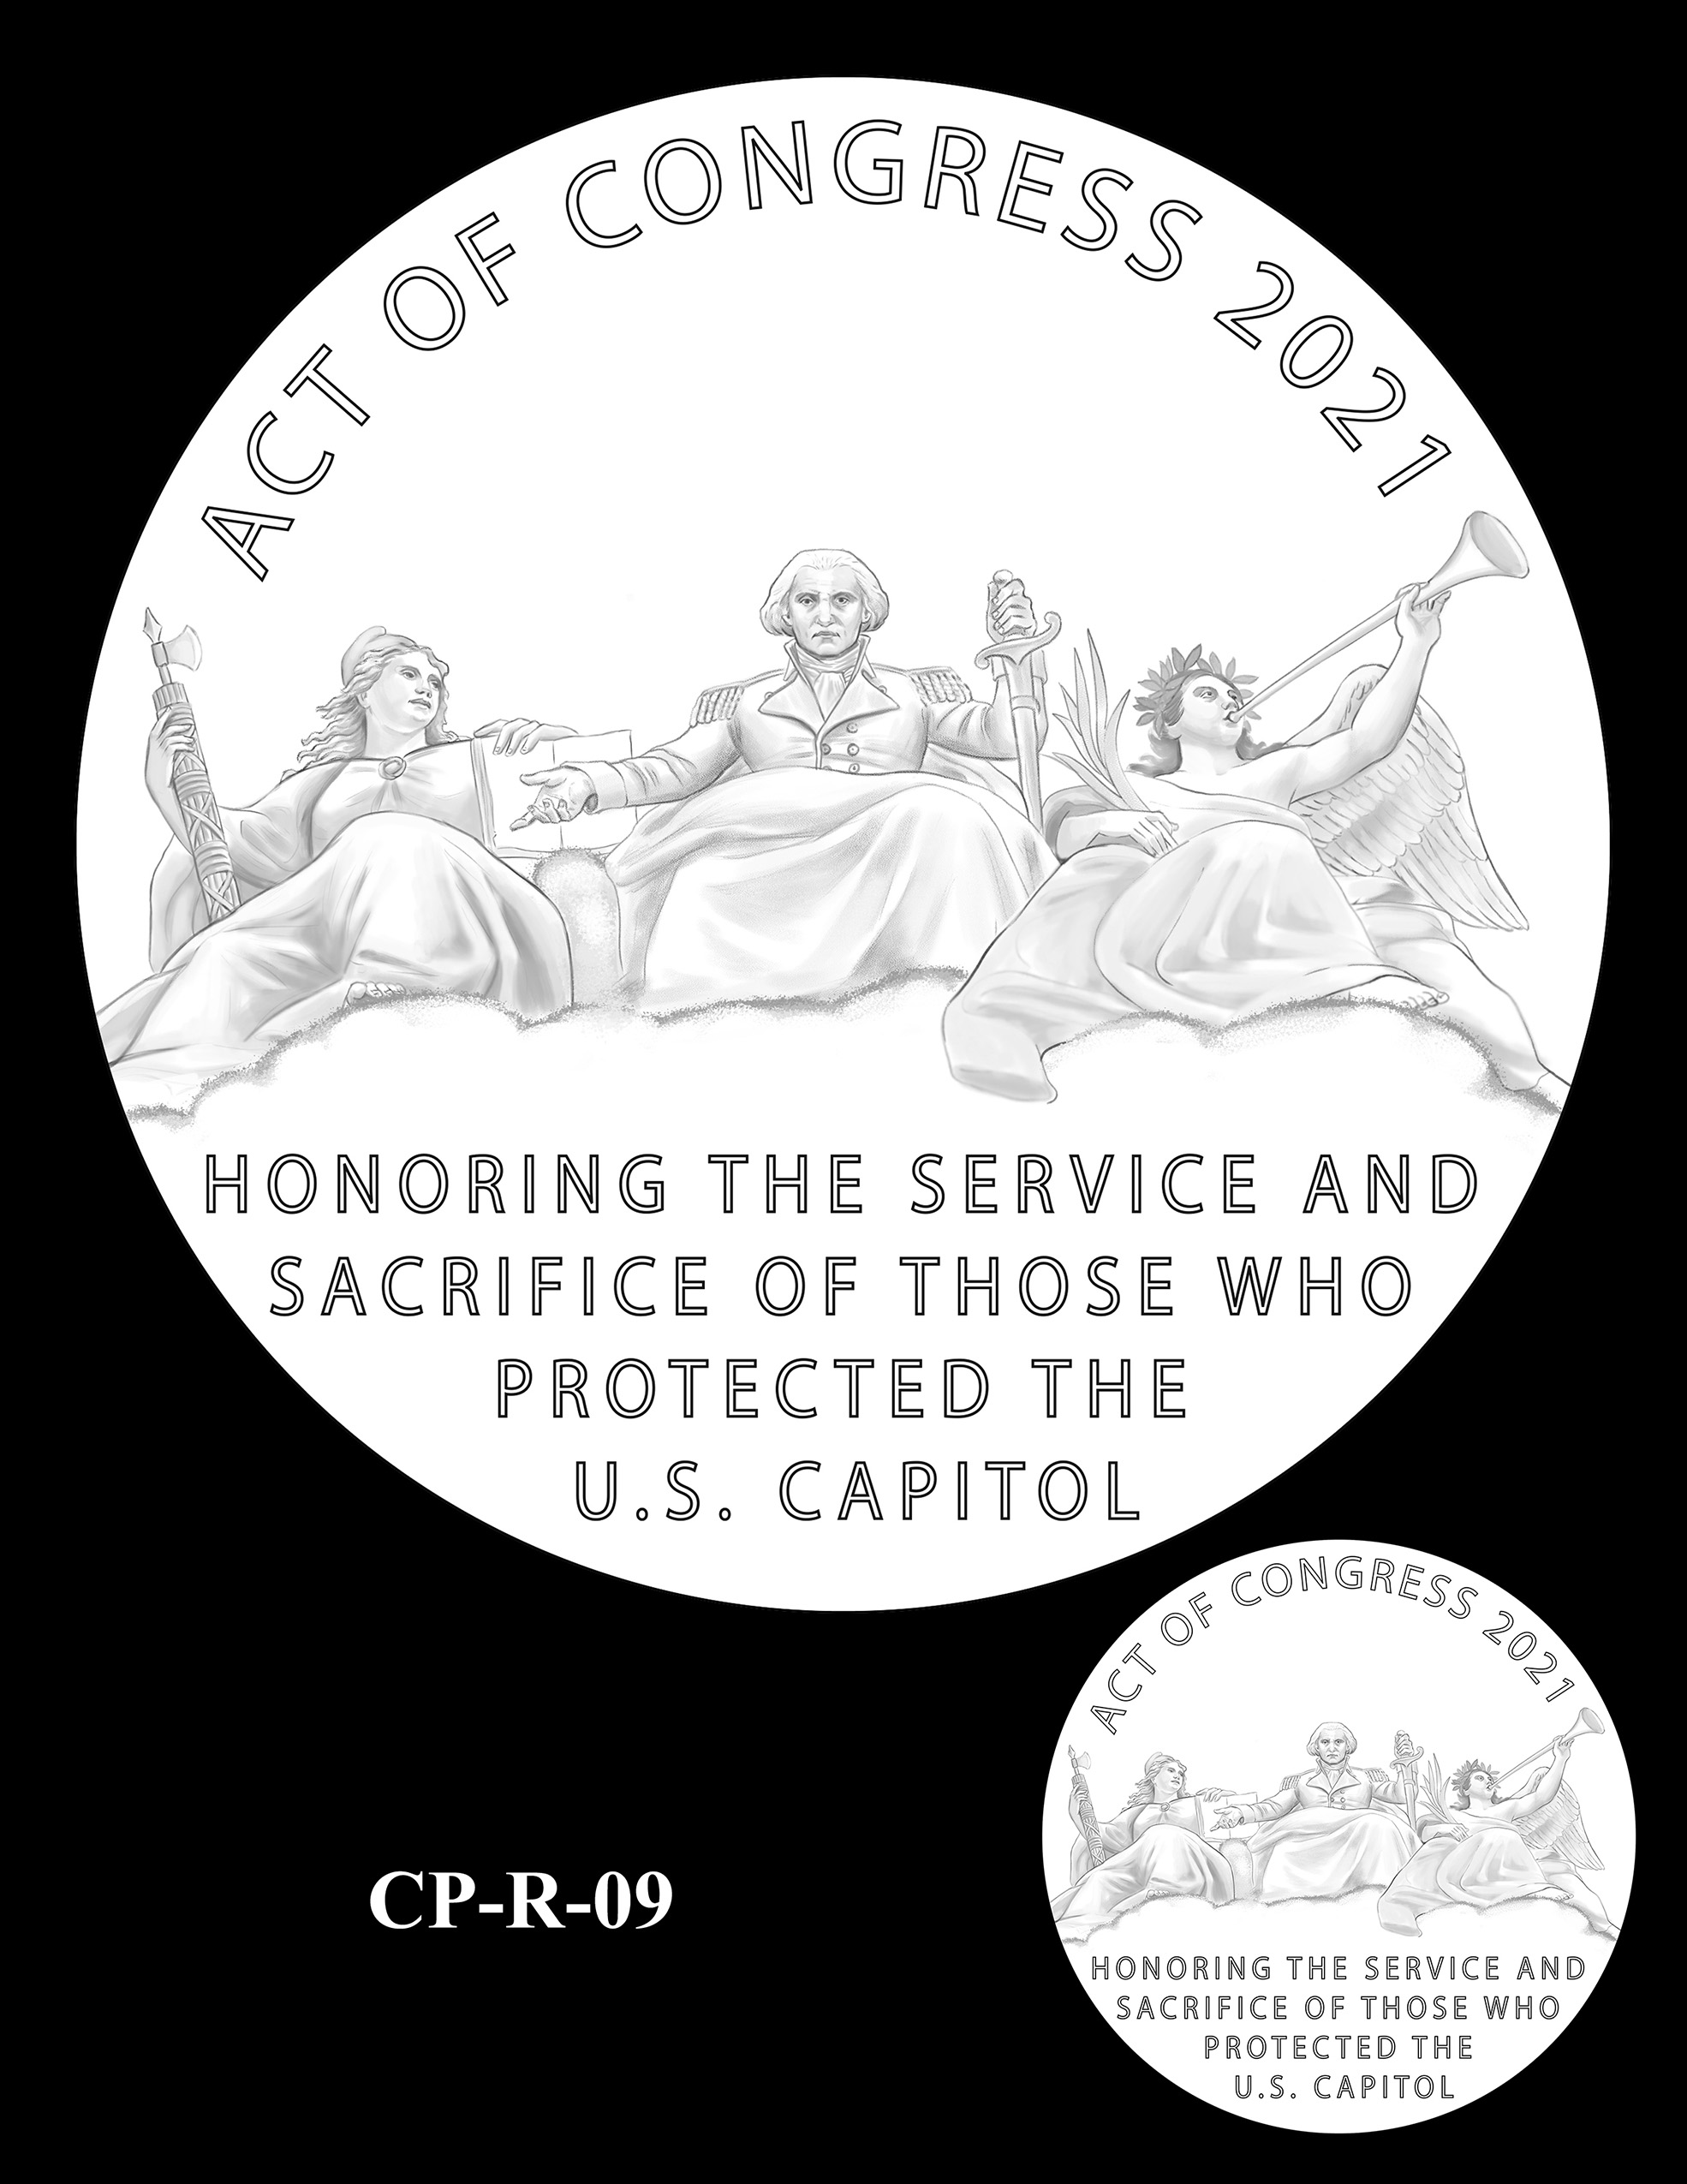 CP-R-09 -- Congressional Gold Medal for Those Who Protected the U.S. Capitol on January 6th 2021